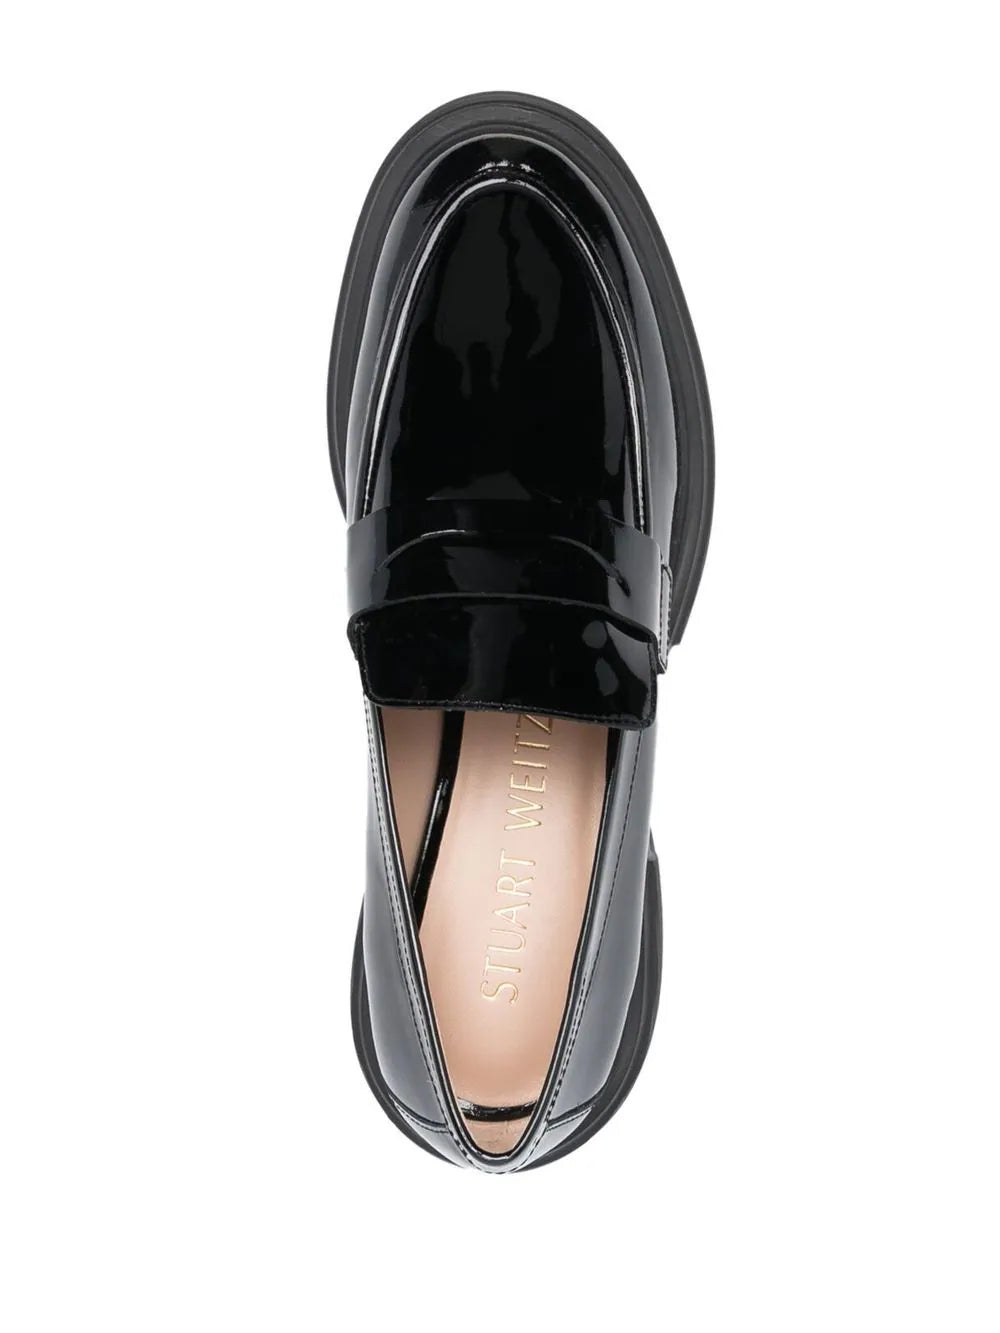 SOHO patent-leather loafers, black